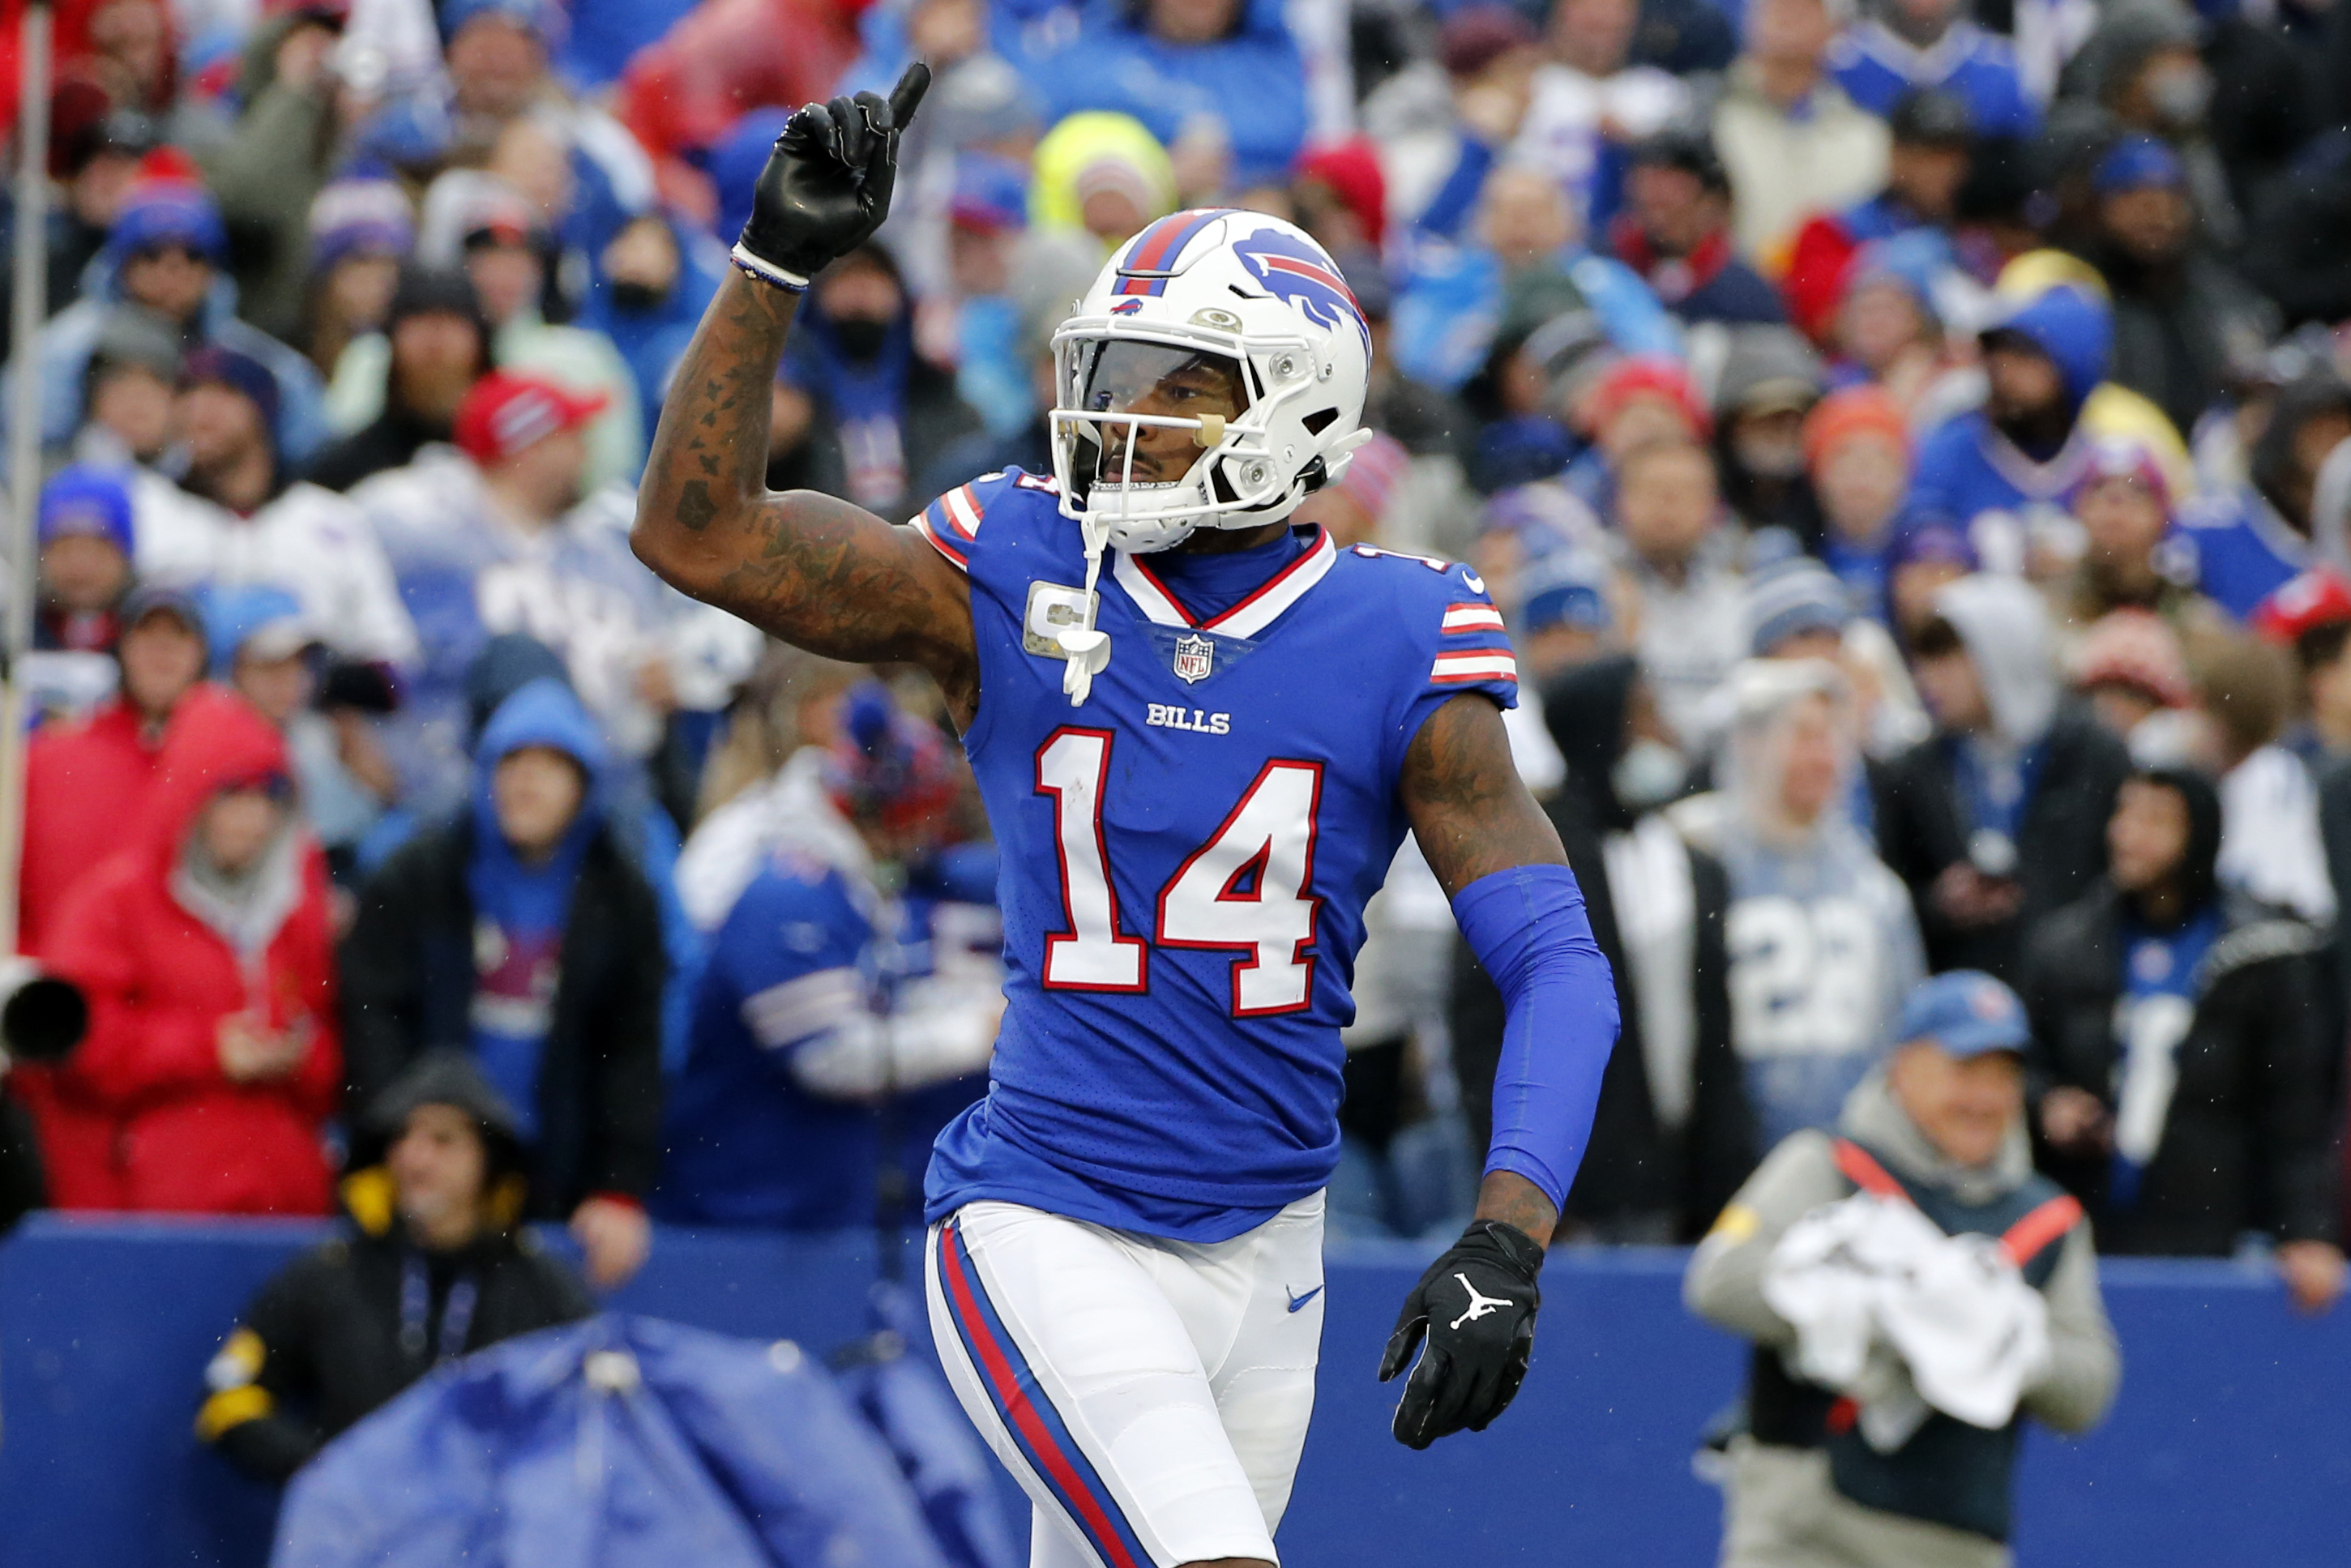 5 takeaways from Buffalo Bills' 41-15 loss to Indianapolis Colts